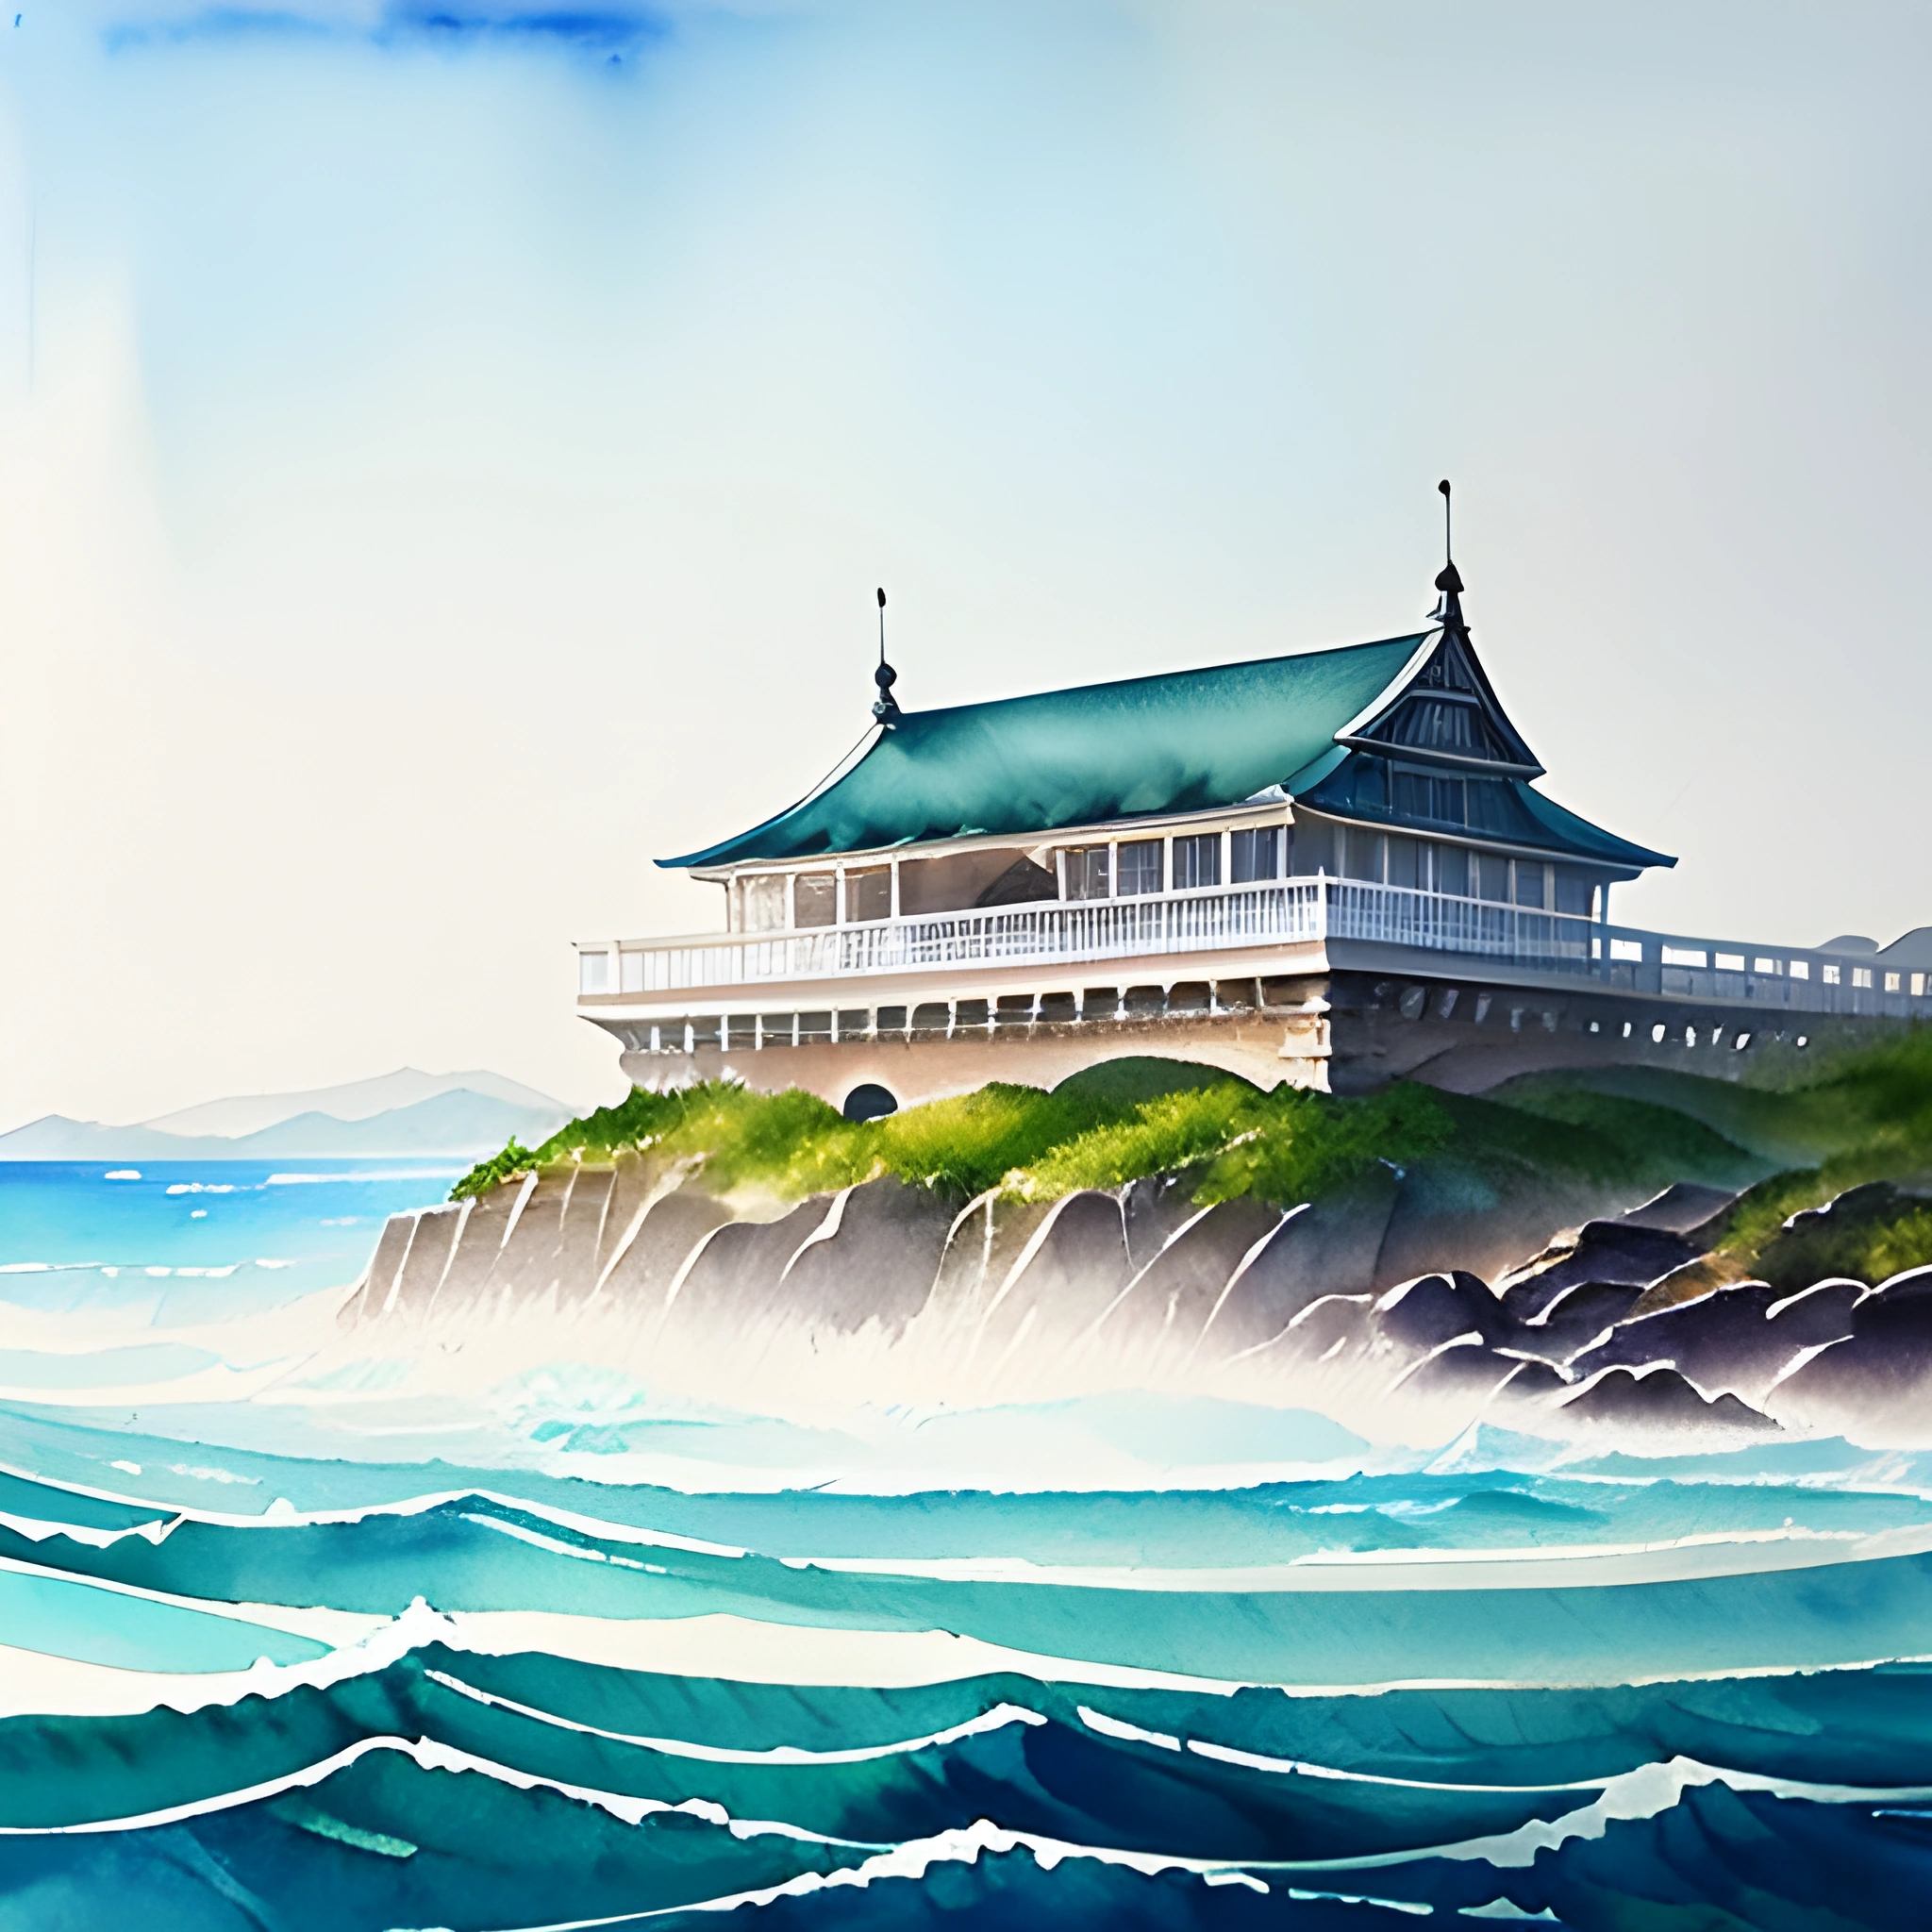 painting of a house on a cliff overlooking the ocean